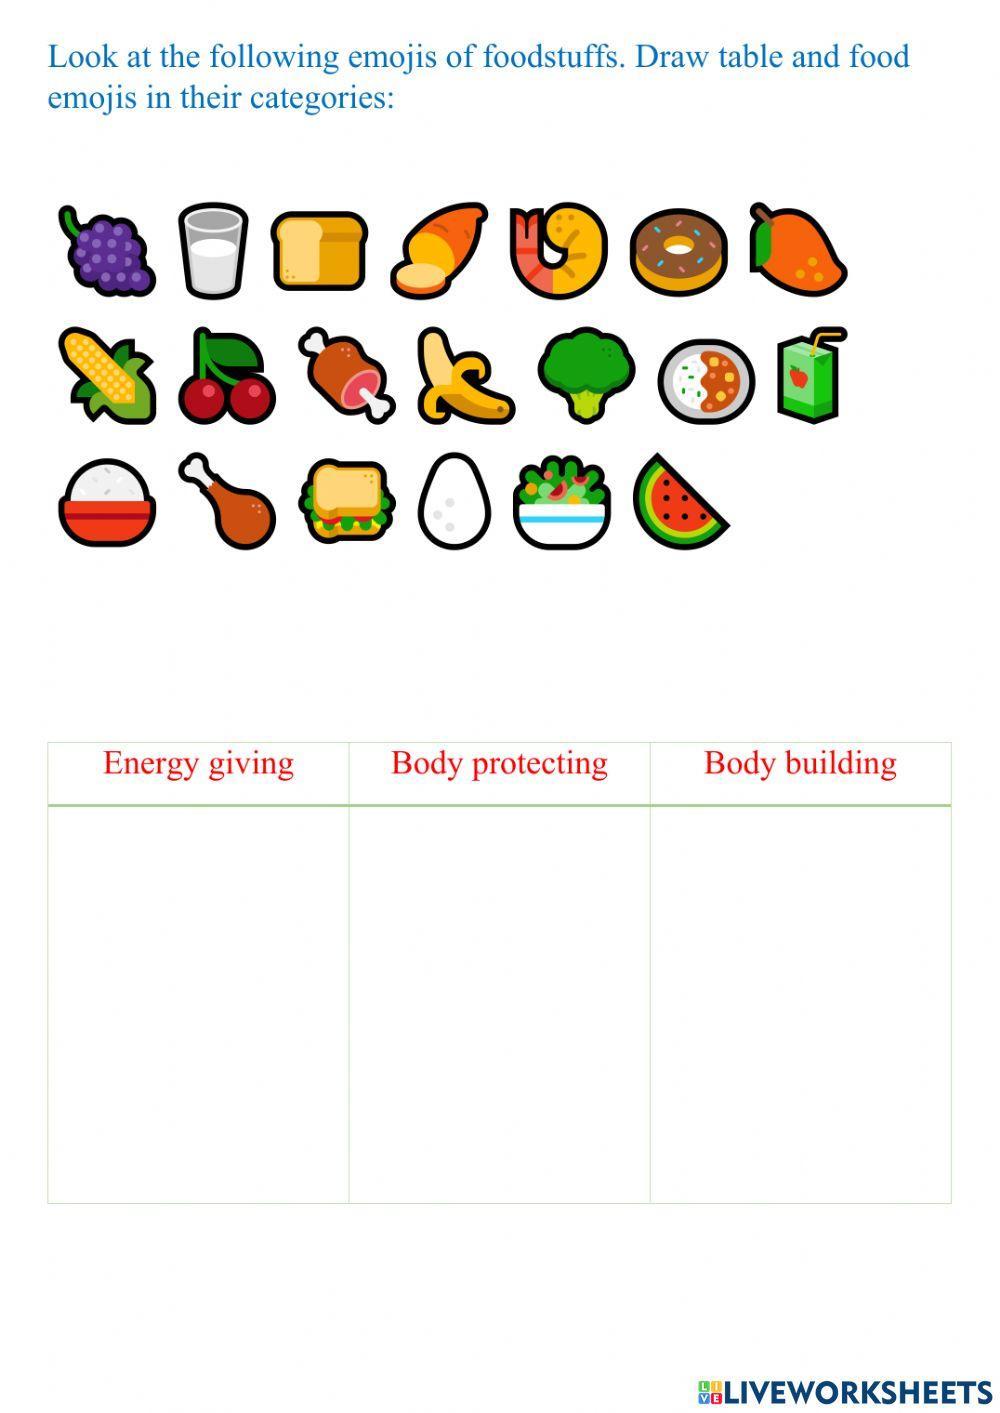 Drag and drop food  items into respective categories